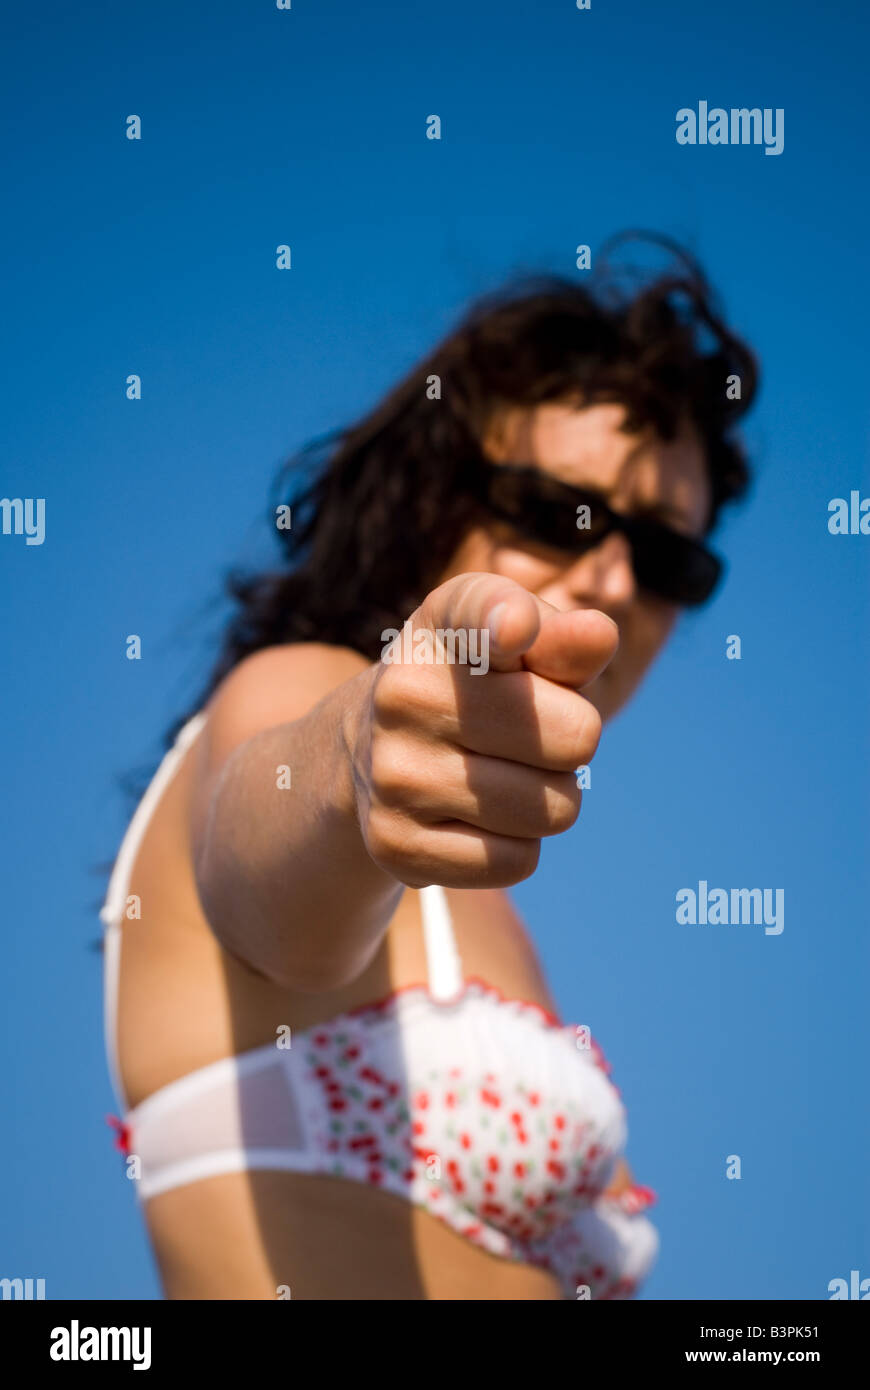 Model Released close up of woman pointing hand with face in background wearing sunglasses and bra Focus on hand Stock Photo